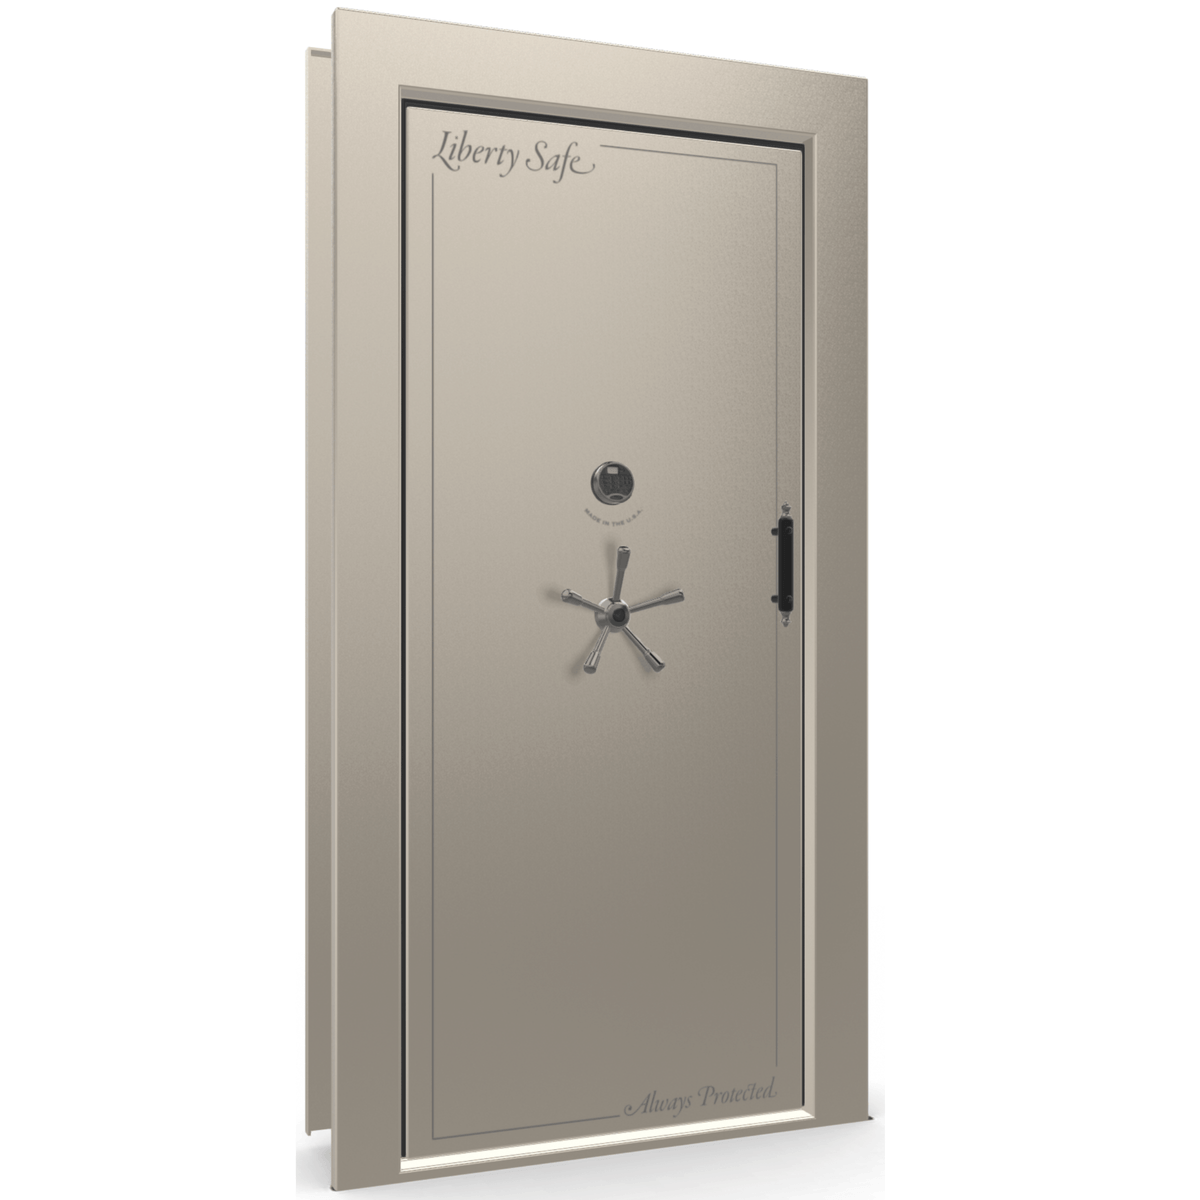 The Beast Vault Door in Champagne Gloss with Black Chrome Electronic Lock, Left Inswing, door closed.